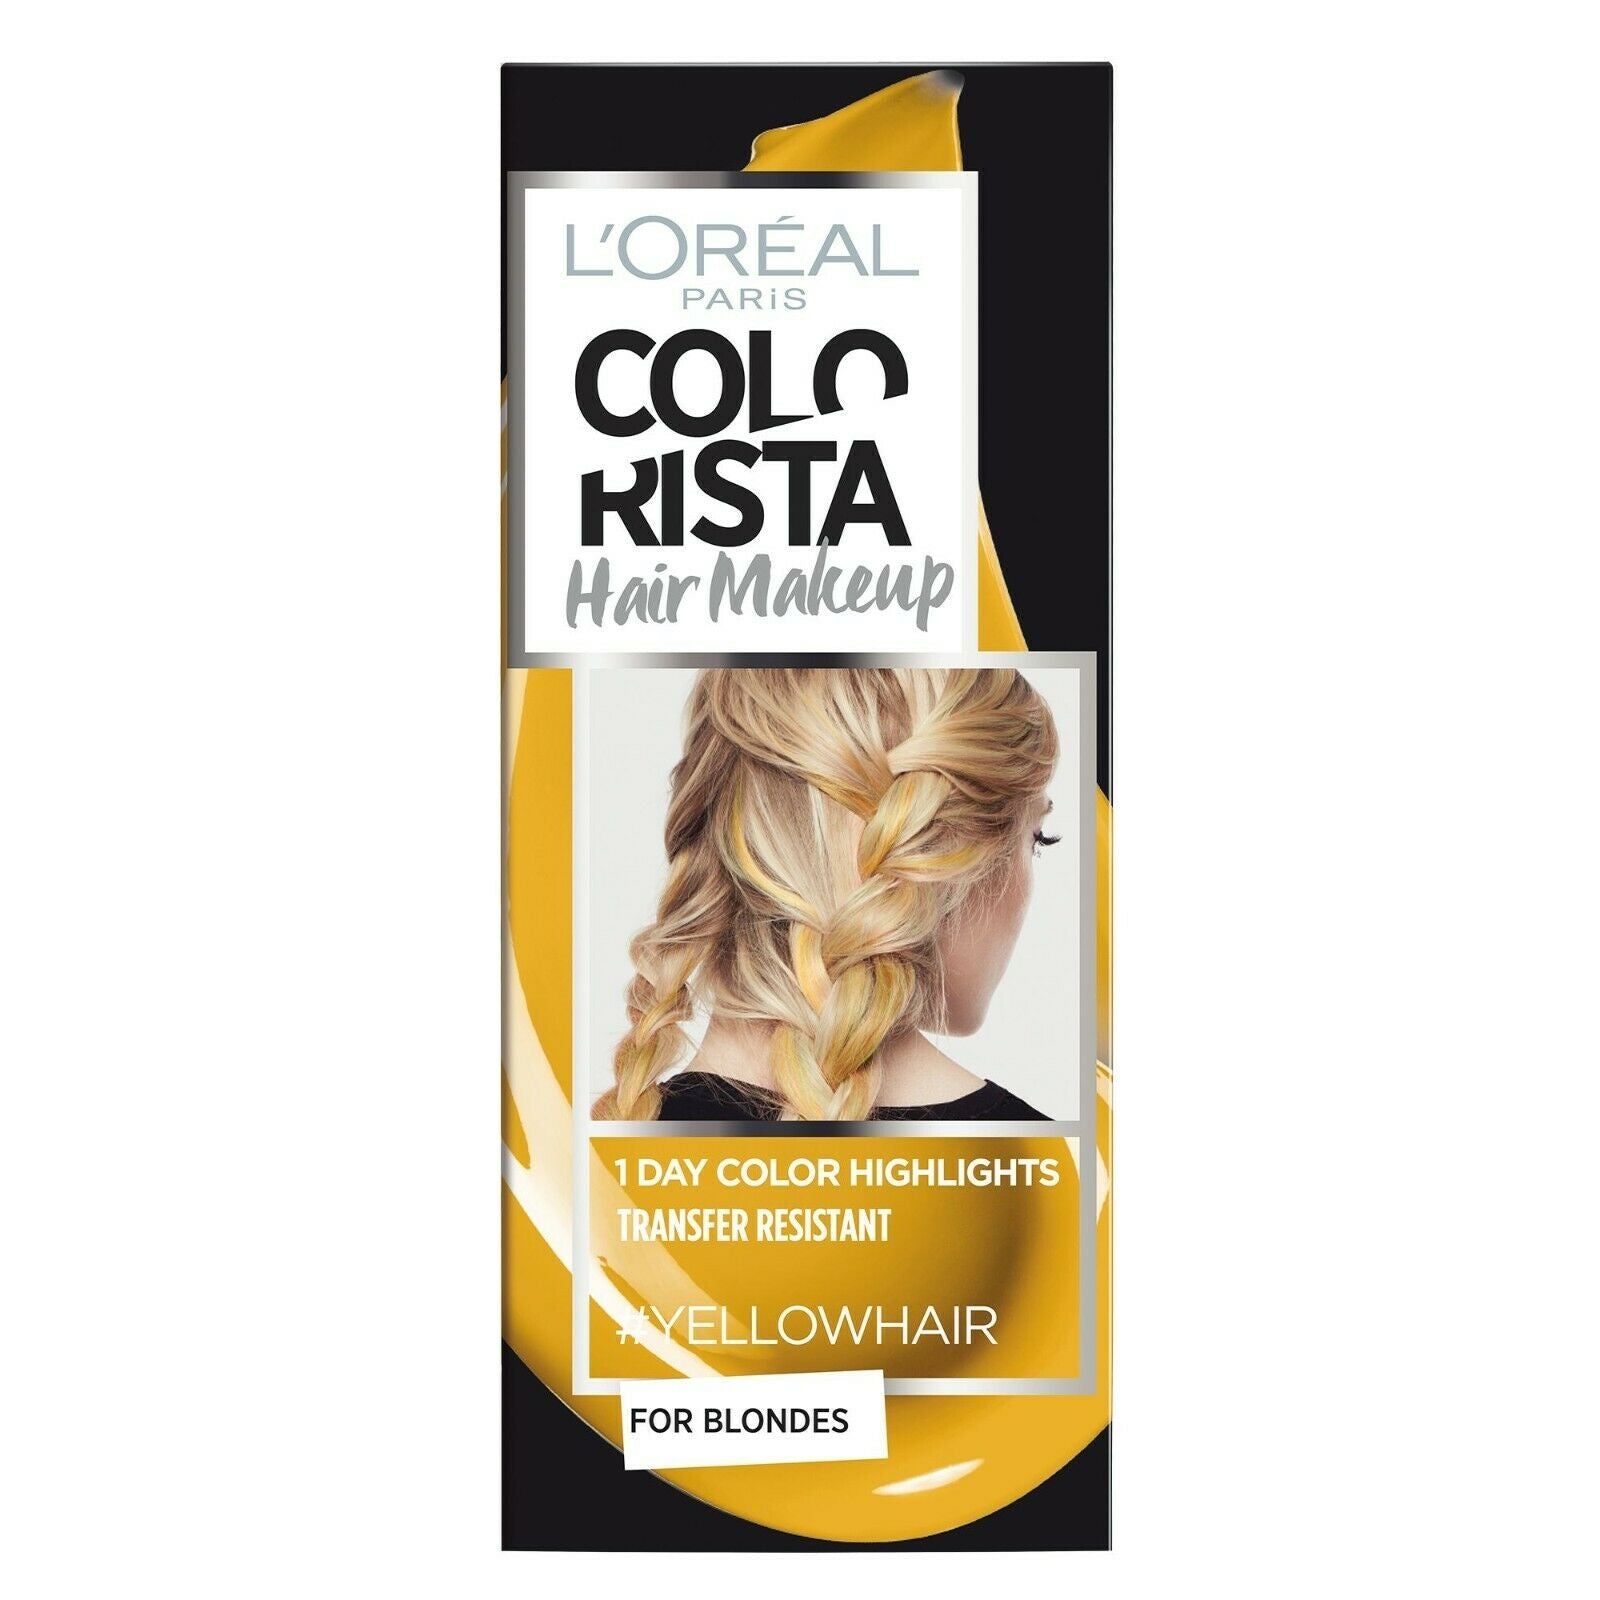 L'Oreal Colorista Hair Makeup Yellow Hair for Blondes 30ml